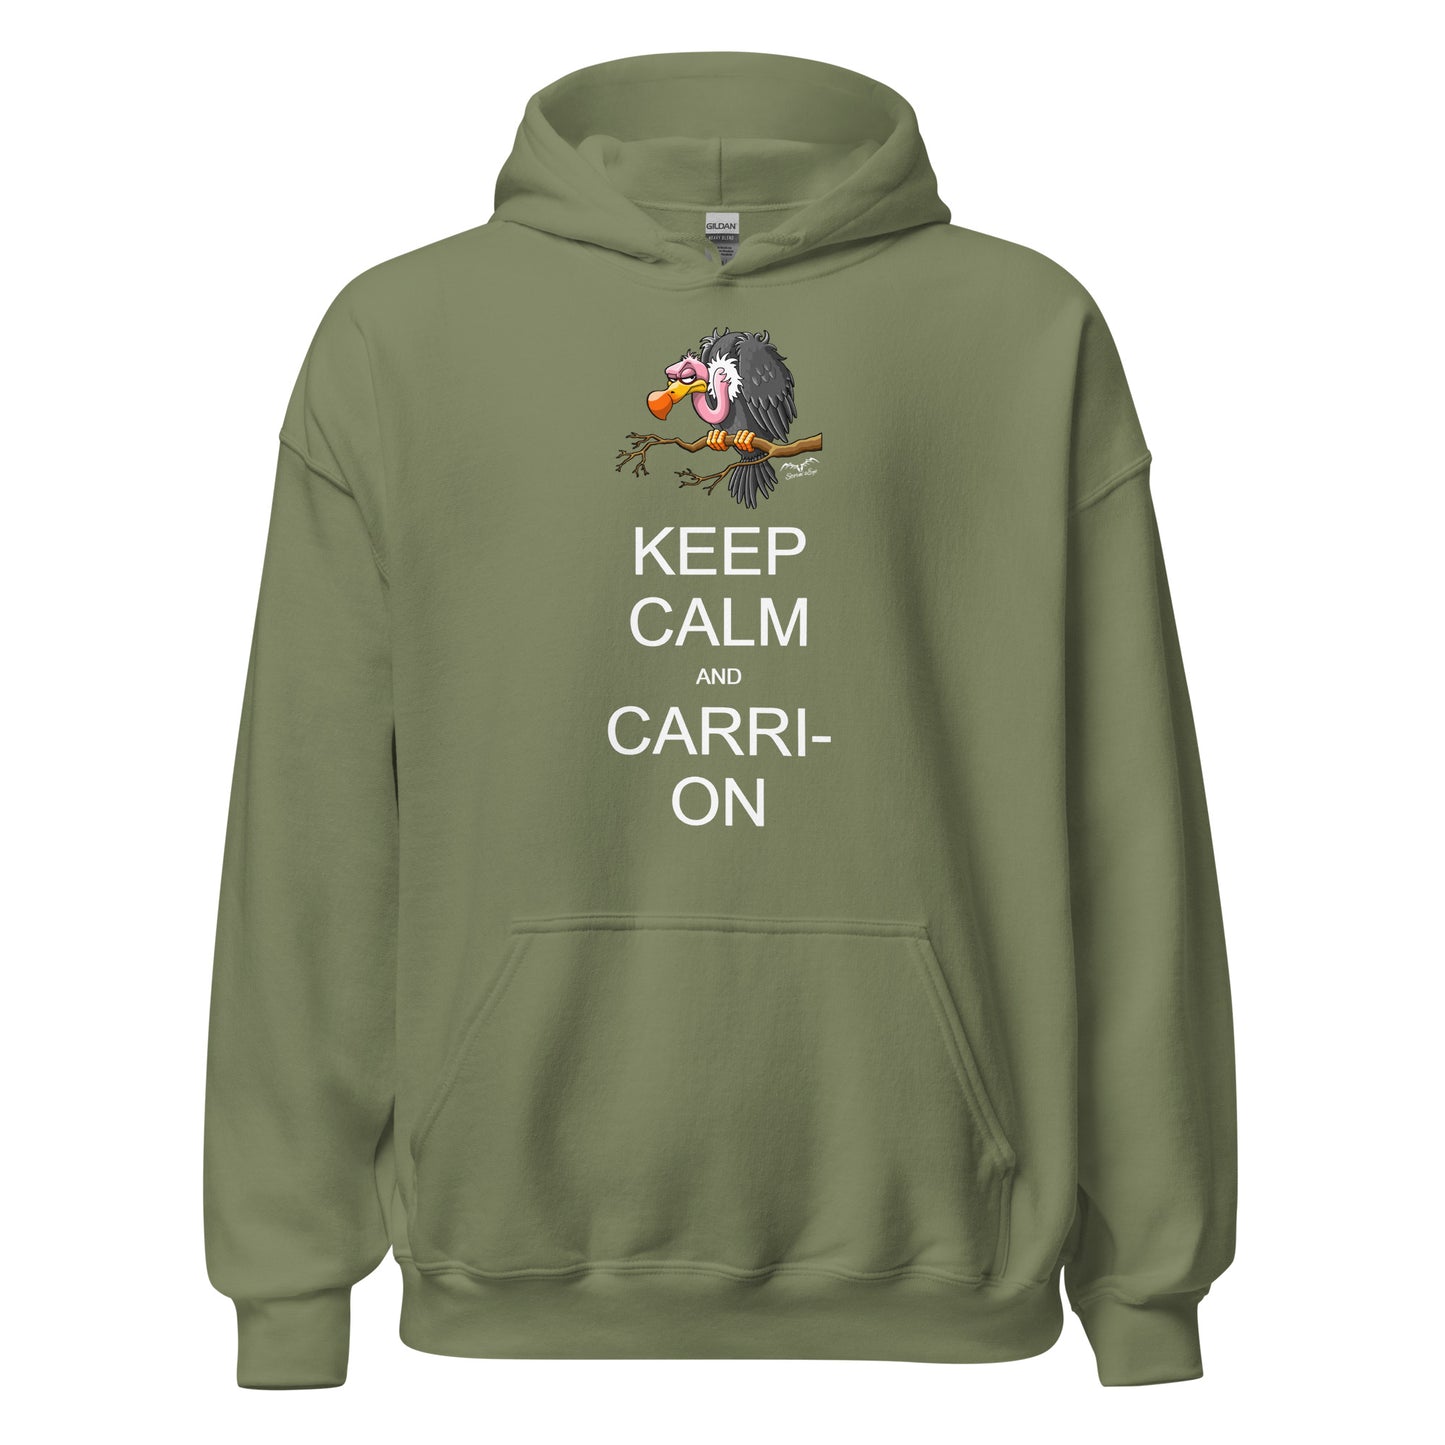 keep calm and carrion vulture hoodie army green by stormseye design